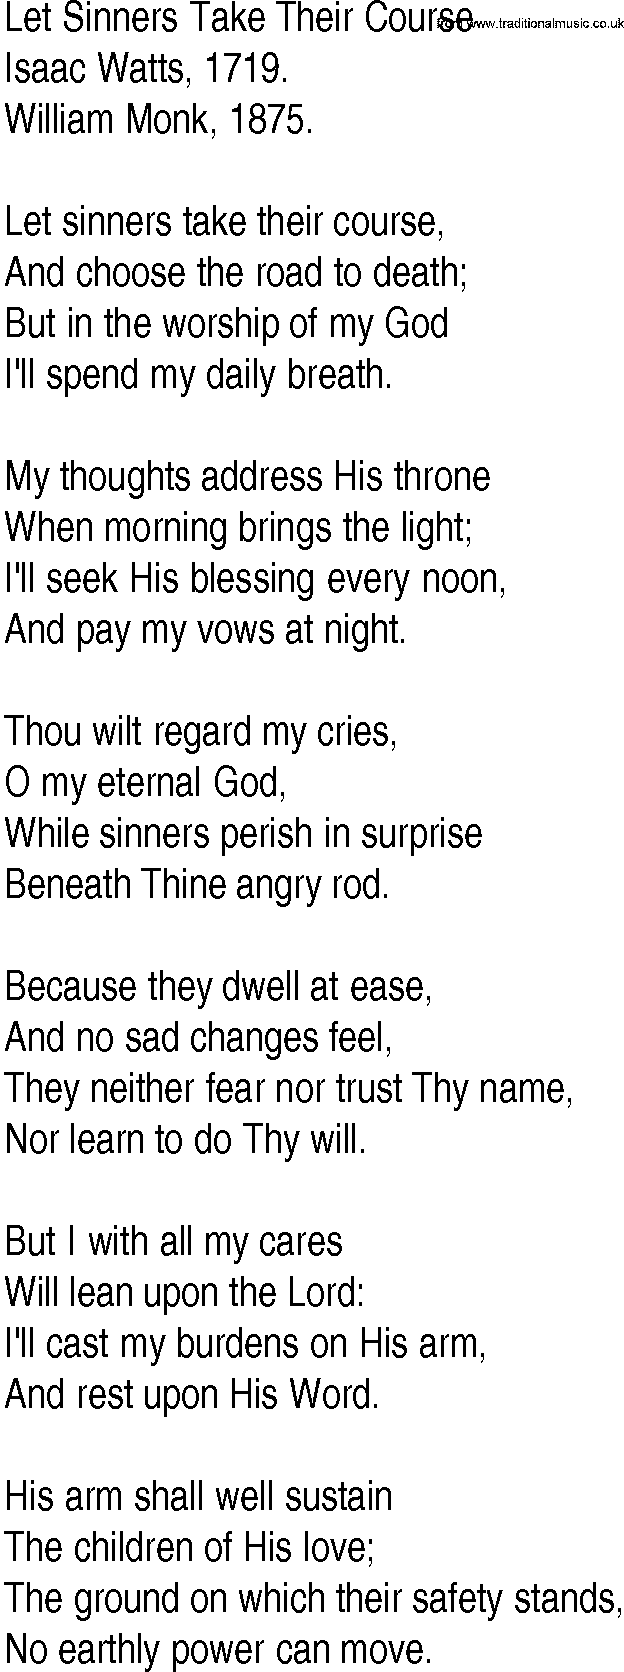 Hymn and Gospel Song: Let Sinners Take Their Course by Isaac Watts lyrics